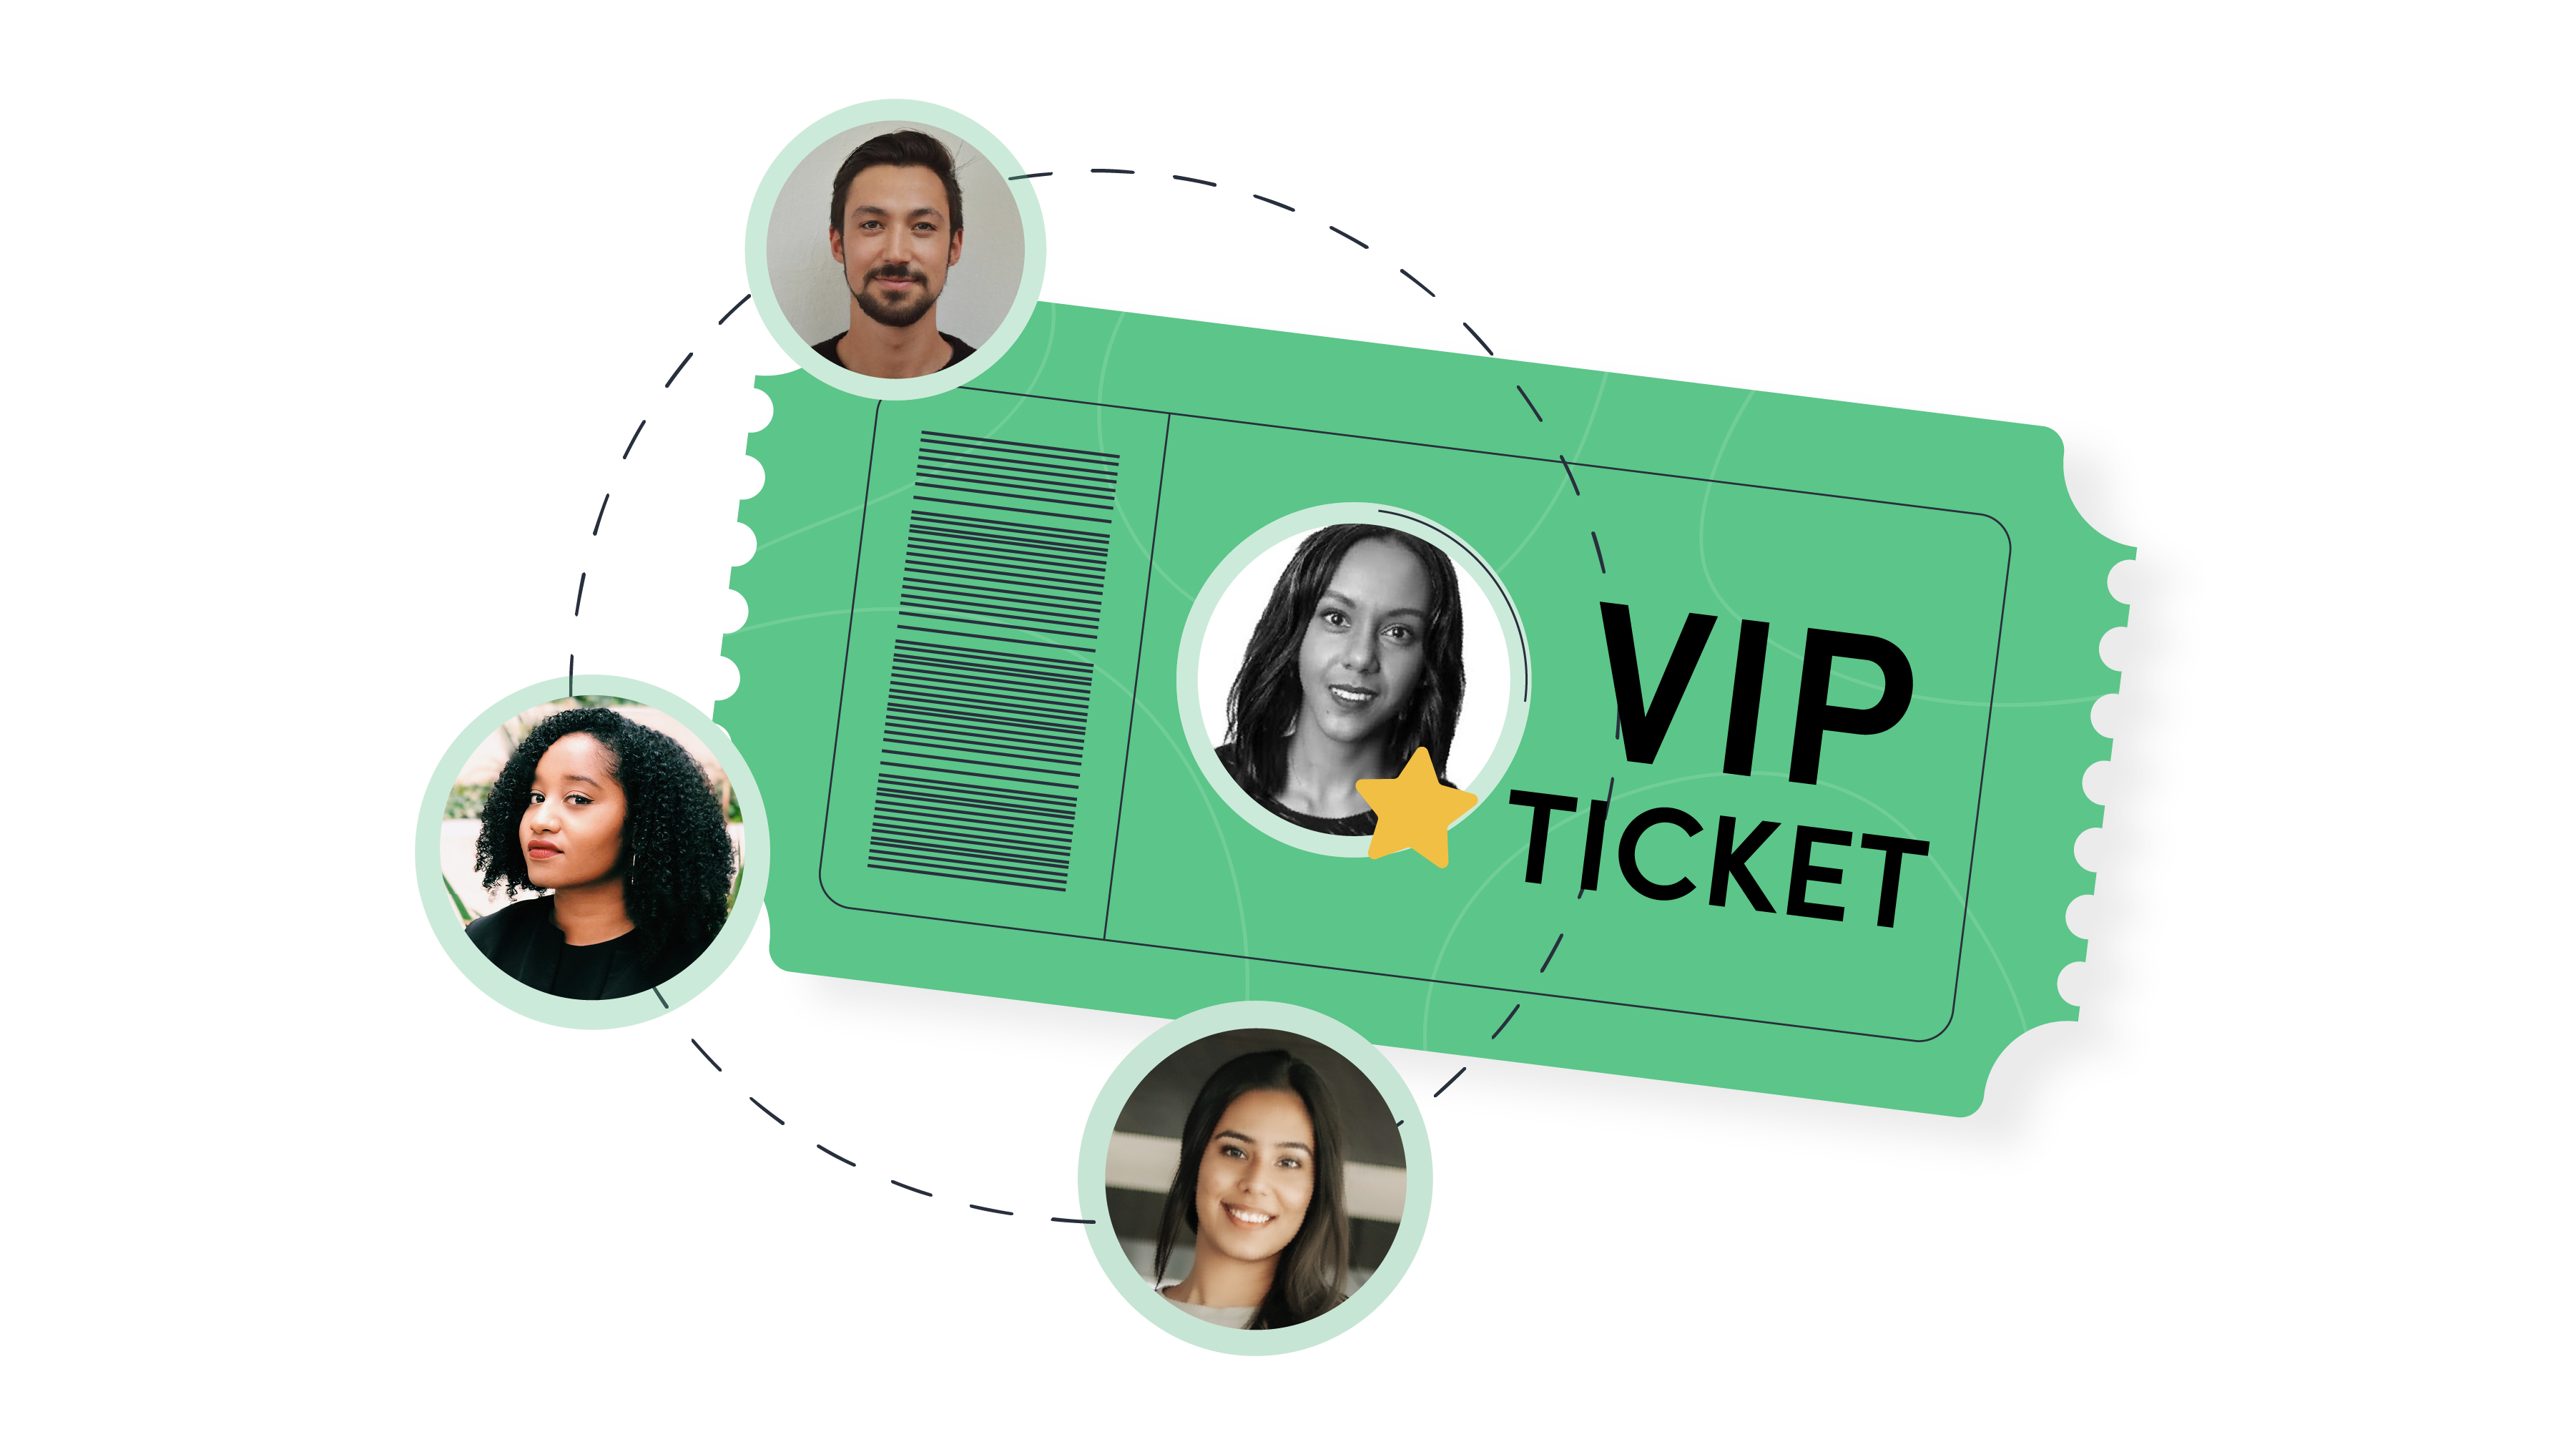 7. VIP-level matchmaking for high-level networking